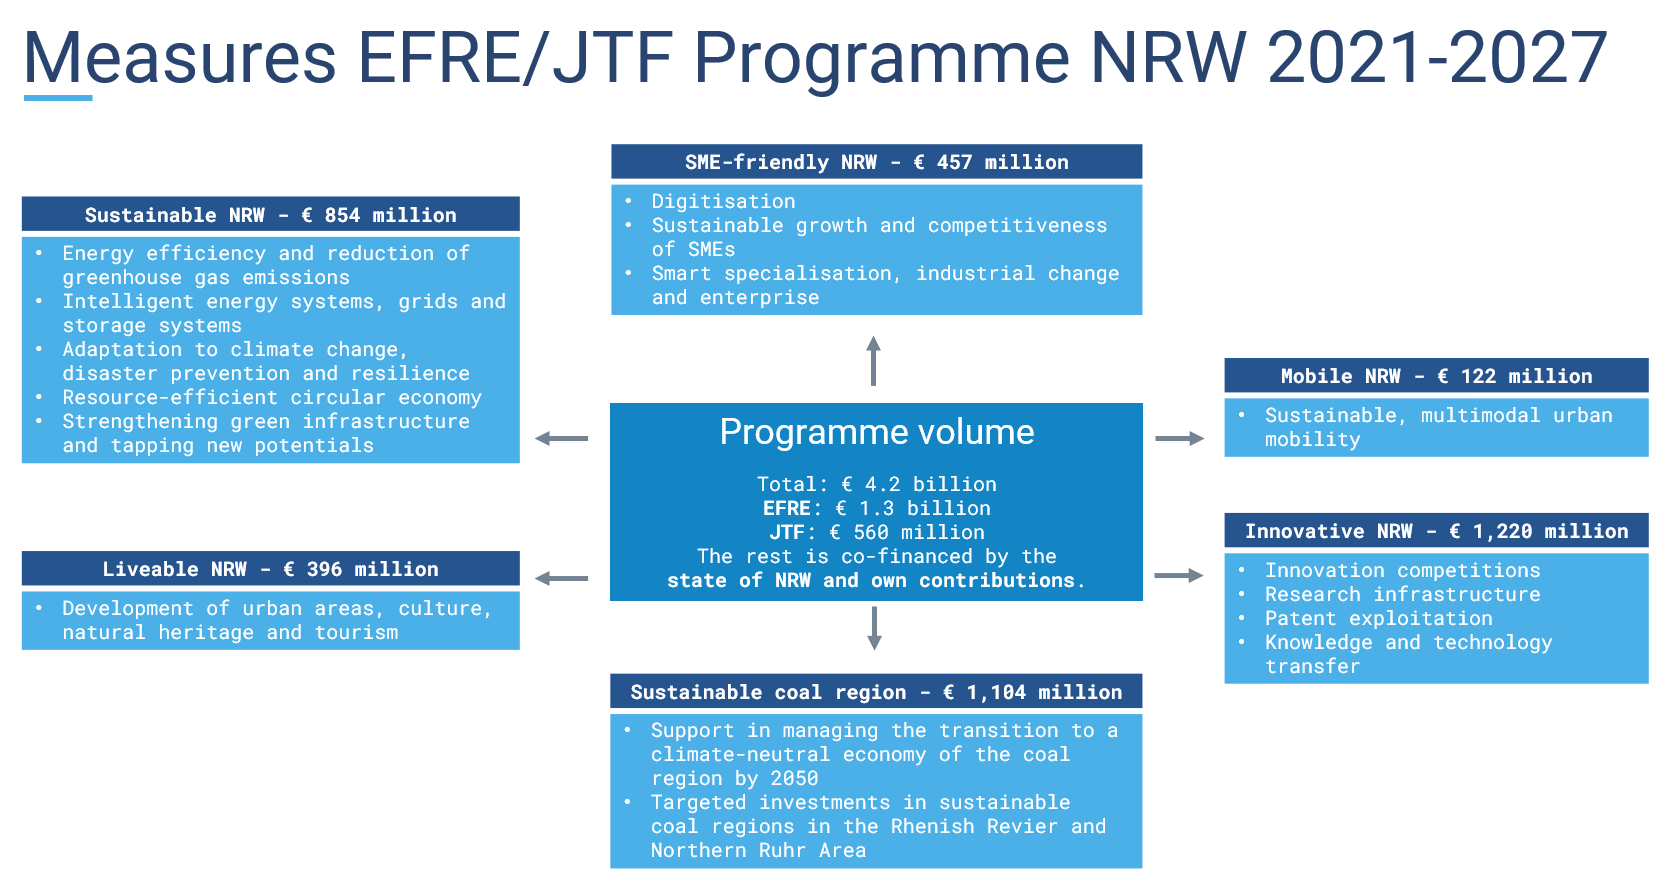 Overview of measures in the NRW EFRE/JTF programme 2021-2027